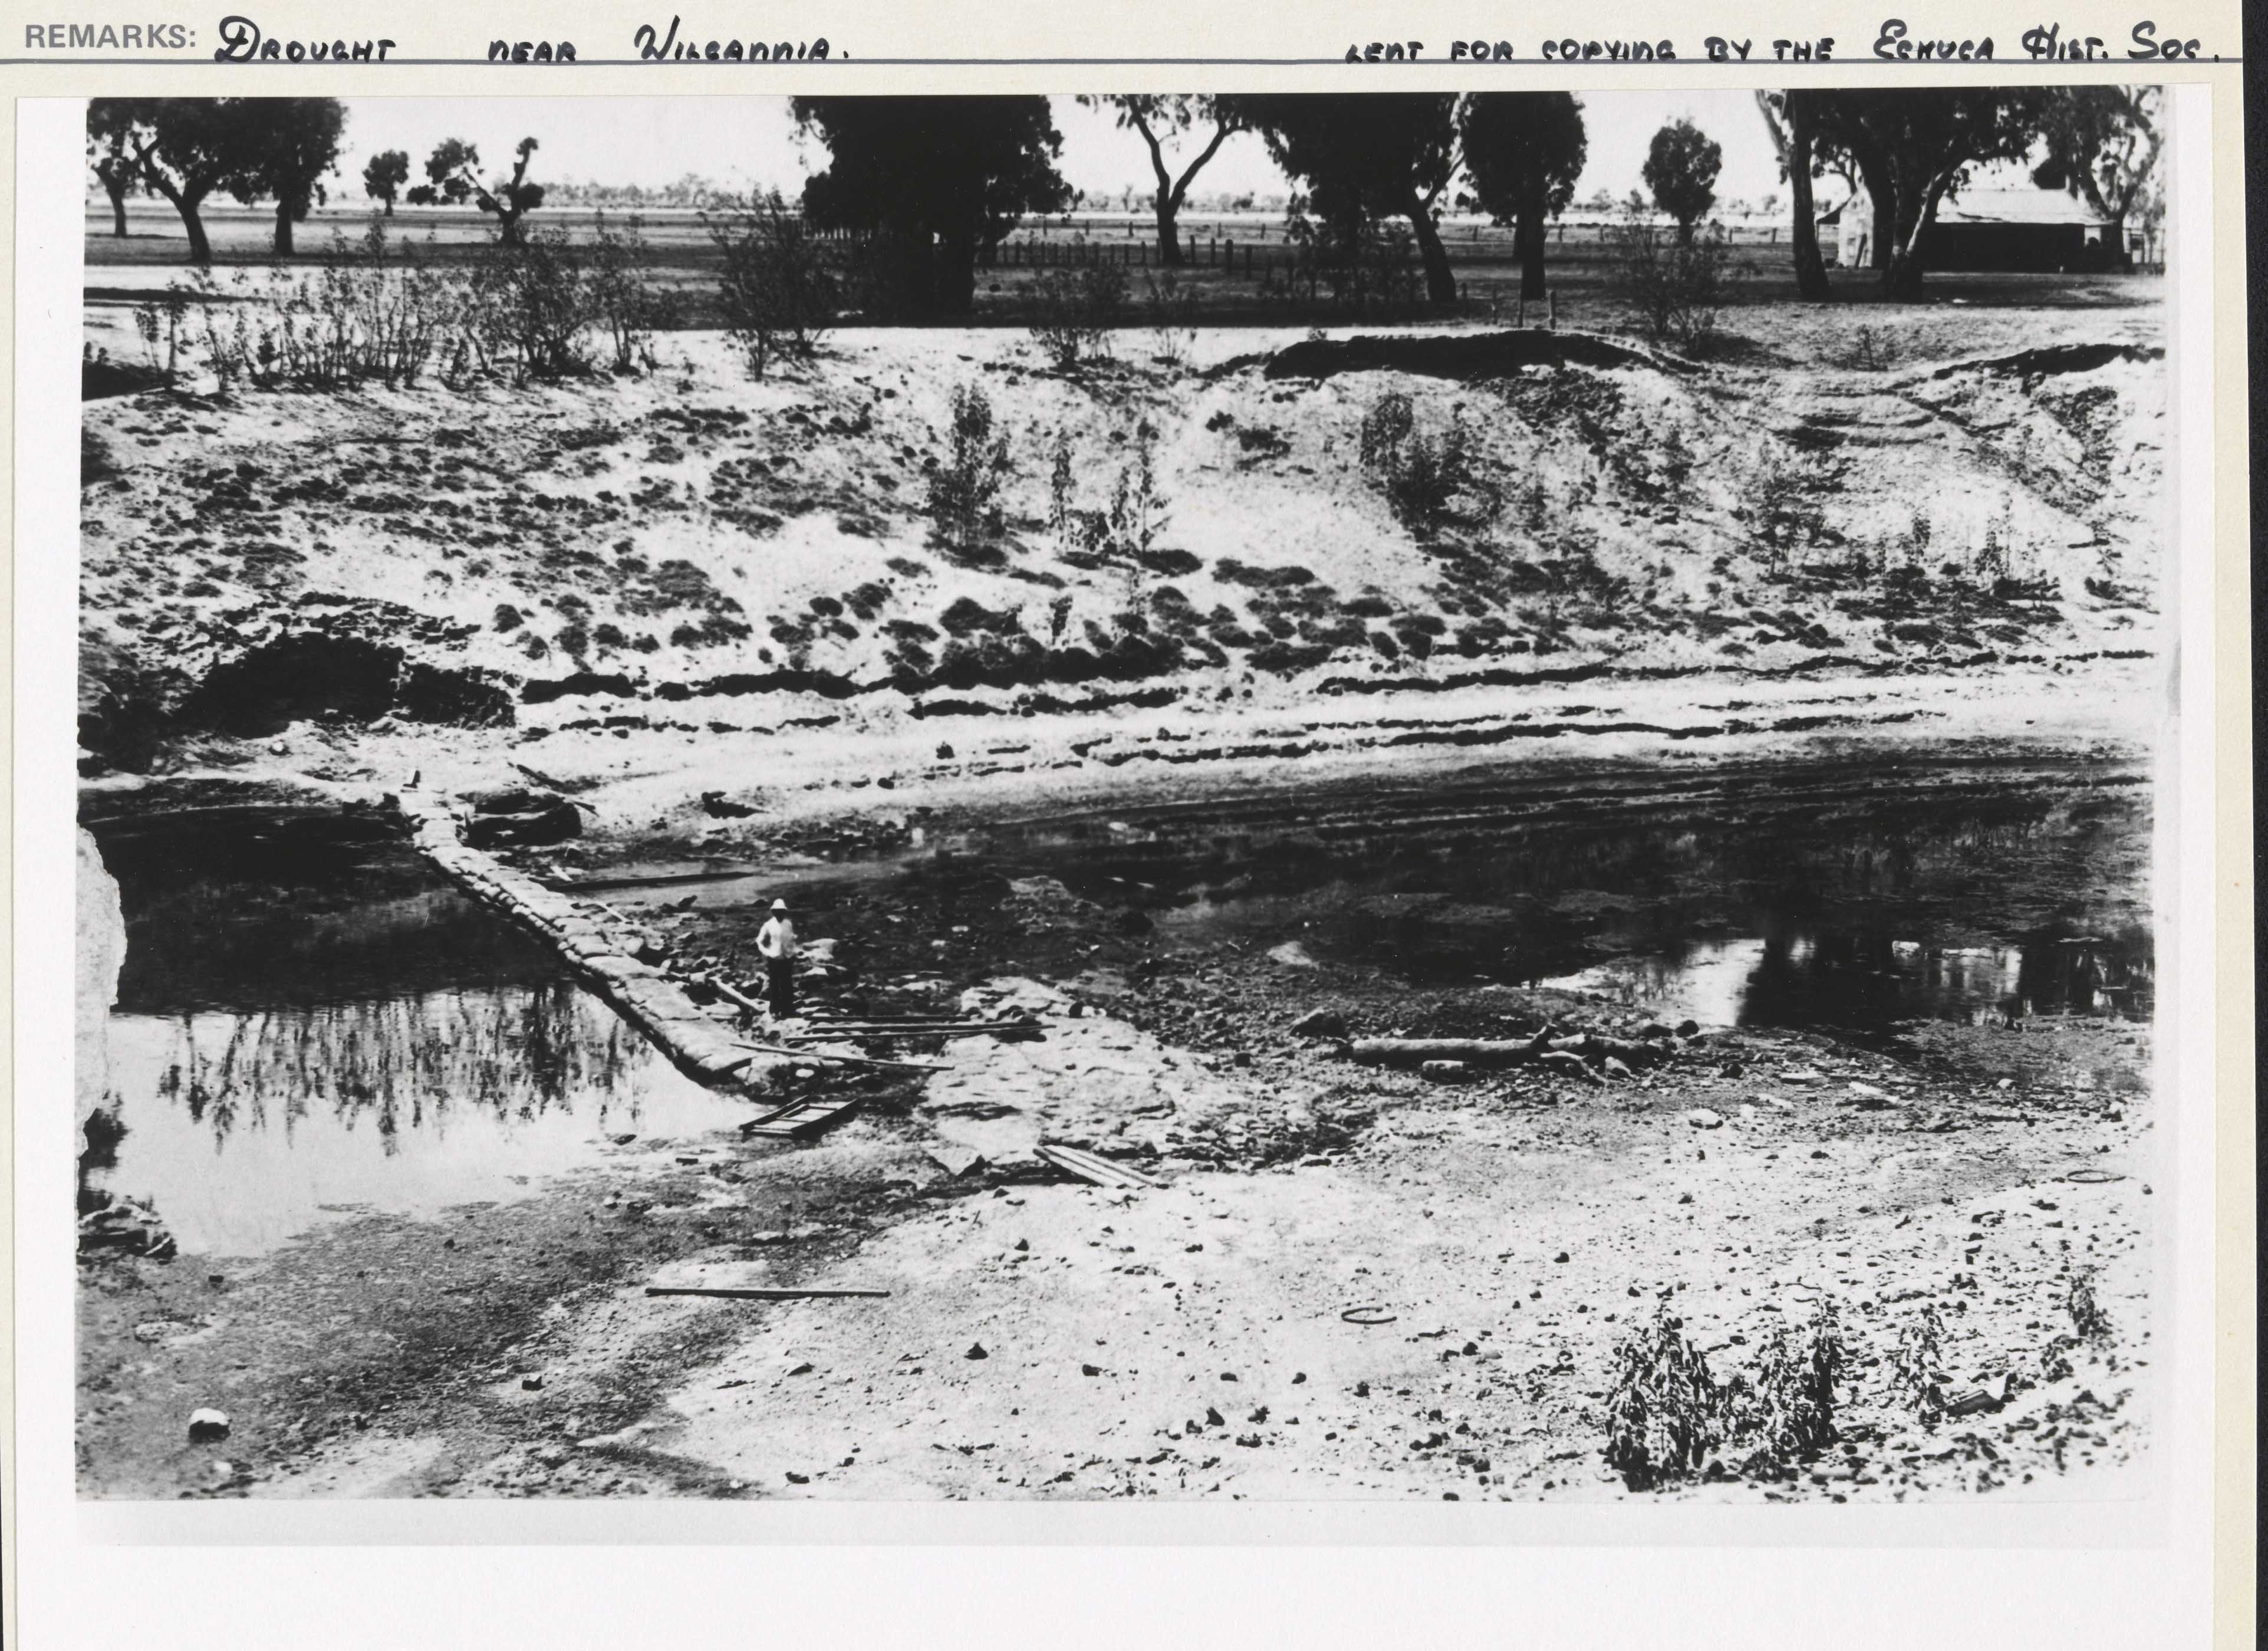 Darling River in drought, near Wilcannia, New South Wales, about 1902.